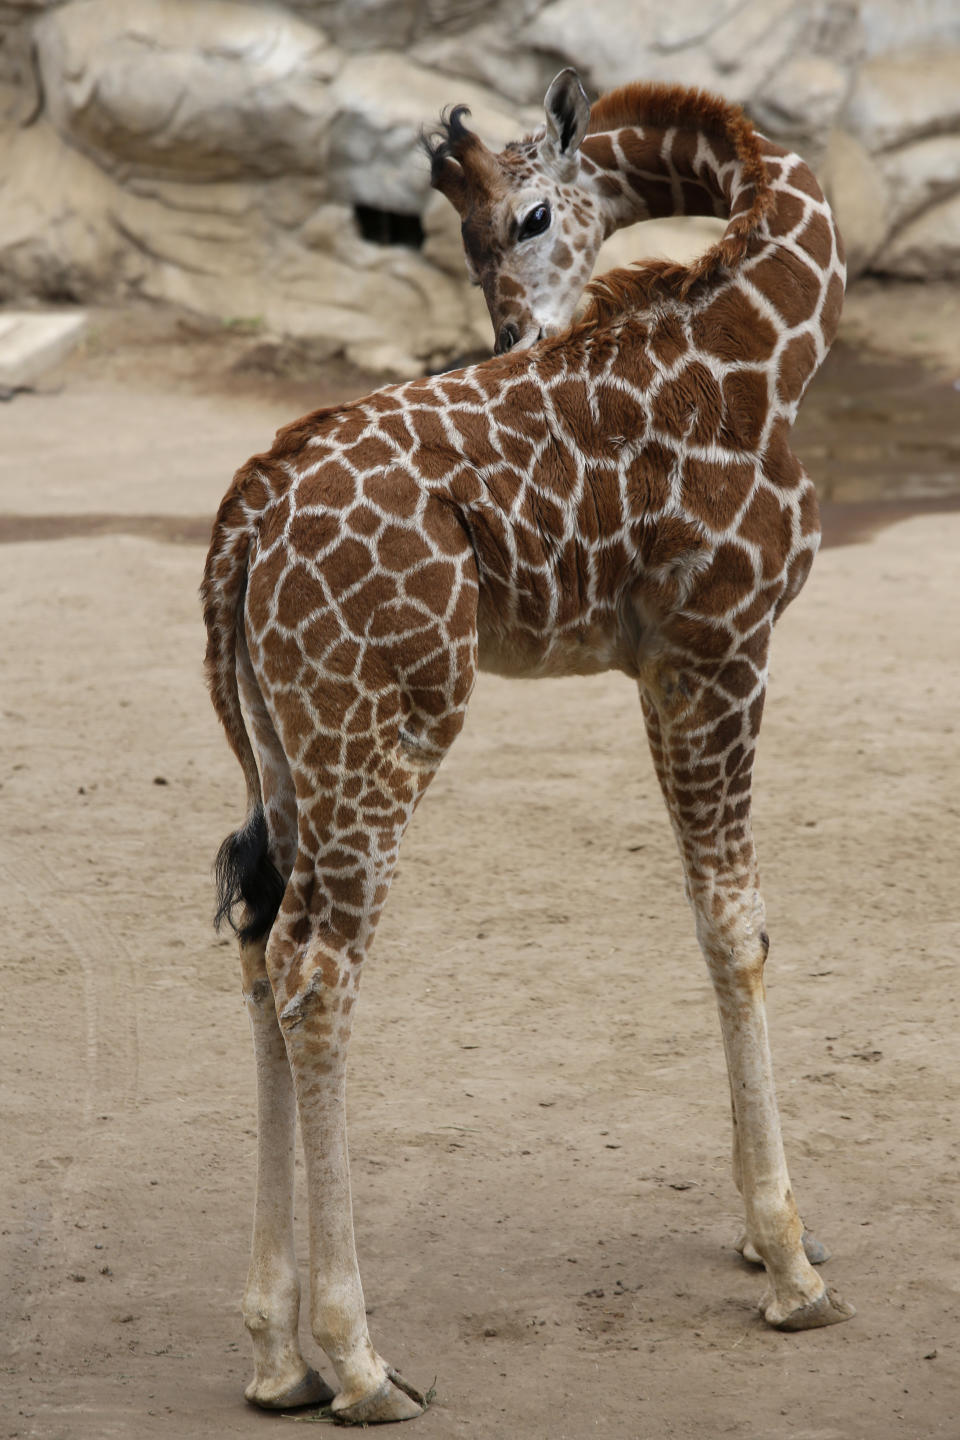 A two-month-old giraffe stands in her enclosure at the Chapultepec Zoo in Mexico City, Sunday, Dec. 29, 2019. The Mexico City zoo is celebrating its second baby giraffe of the year. The female giraffe was unveiled this week after a mandatory quarantine period following her Oct. 23 birth. She will be named via a public vote. (AP Photo/Ginnette Riquelme)